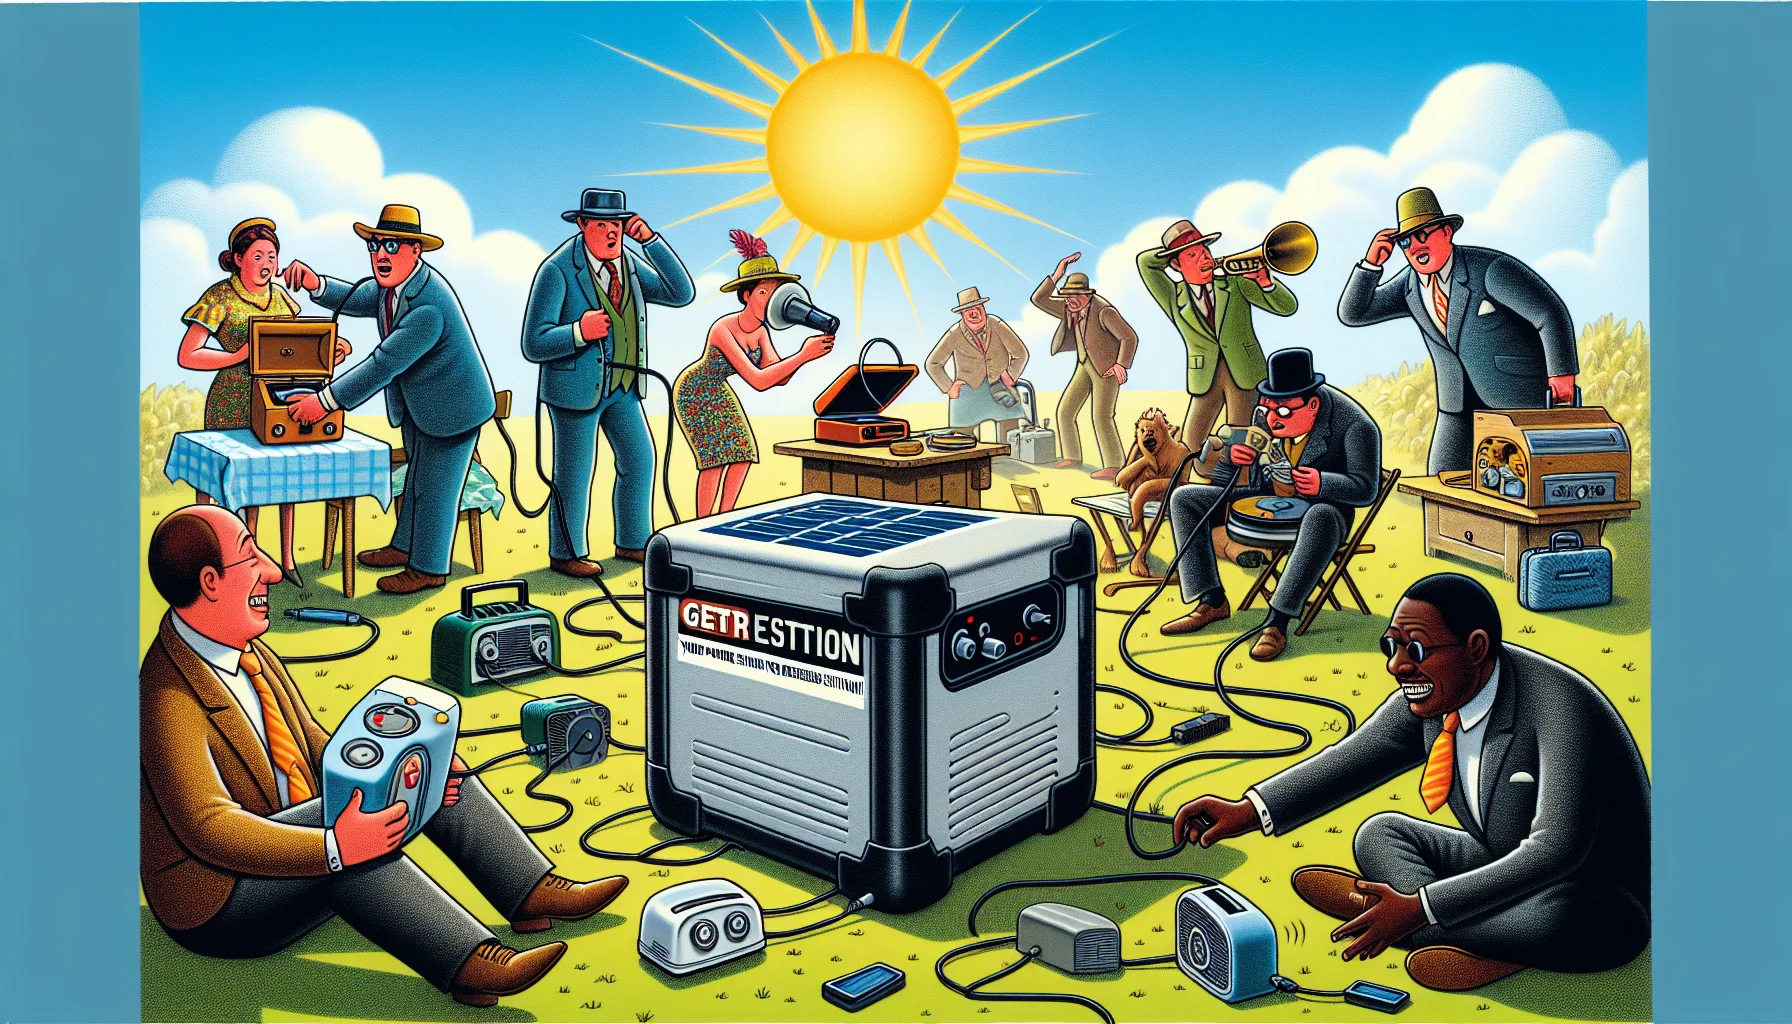 Illustrate a humorous situation of a solar generator with the size and shape characteristic to a Yeti, but it is not a Yeti brand, placed in an outdoor sunlit setting. It's amidst well-dressed Caucasian and Black men and women, who are trying to connect various odd devices to it, like a toaster, an old-fashioned gramophone and even a turntable! The bright sun is shining above, and there's a bold tagline below saying, 'Your power solution for every absurd situation!'